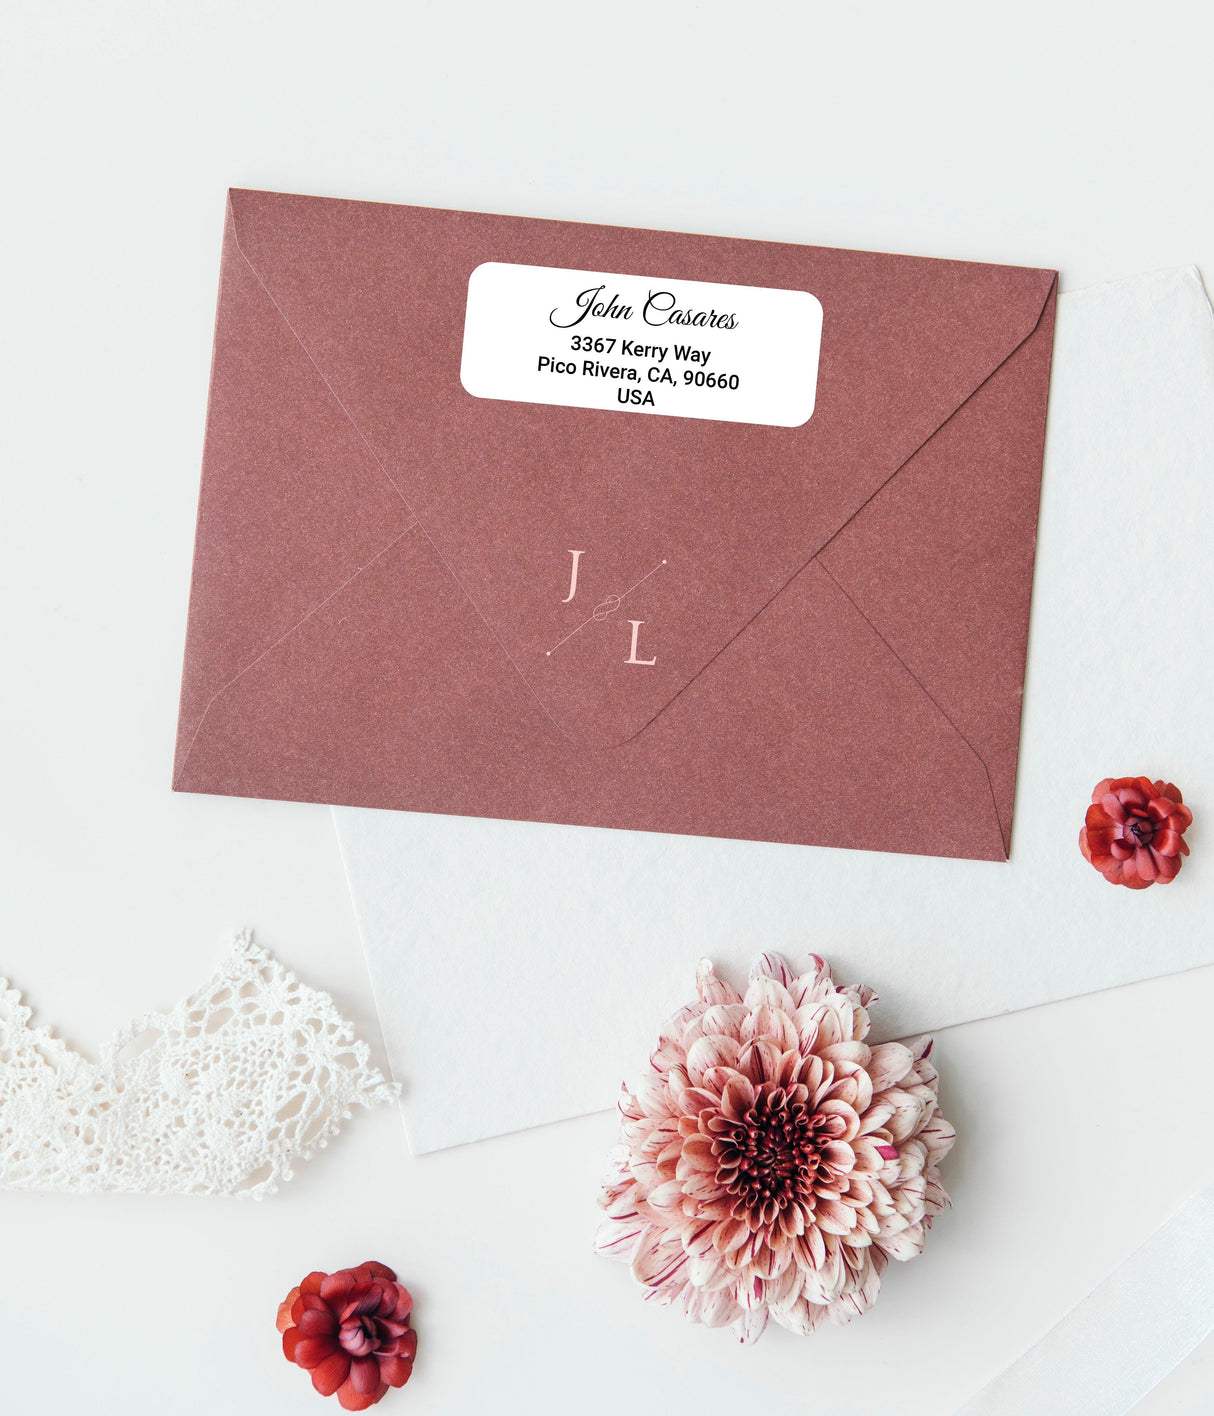 Personalized Return Address Labels - Custom Mailing Avery Shipping Stickers - Customized Self Adhesive White Envelope Mail Business Lables - Decords